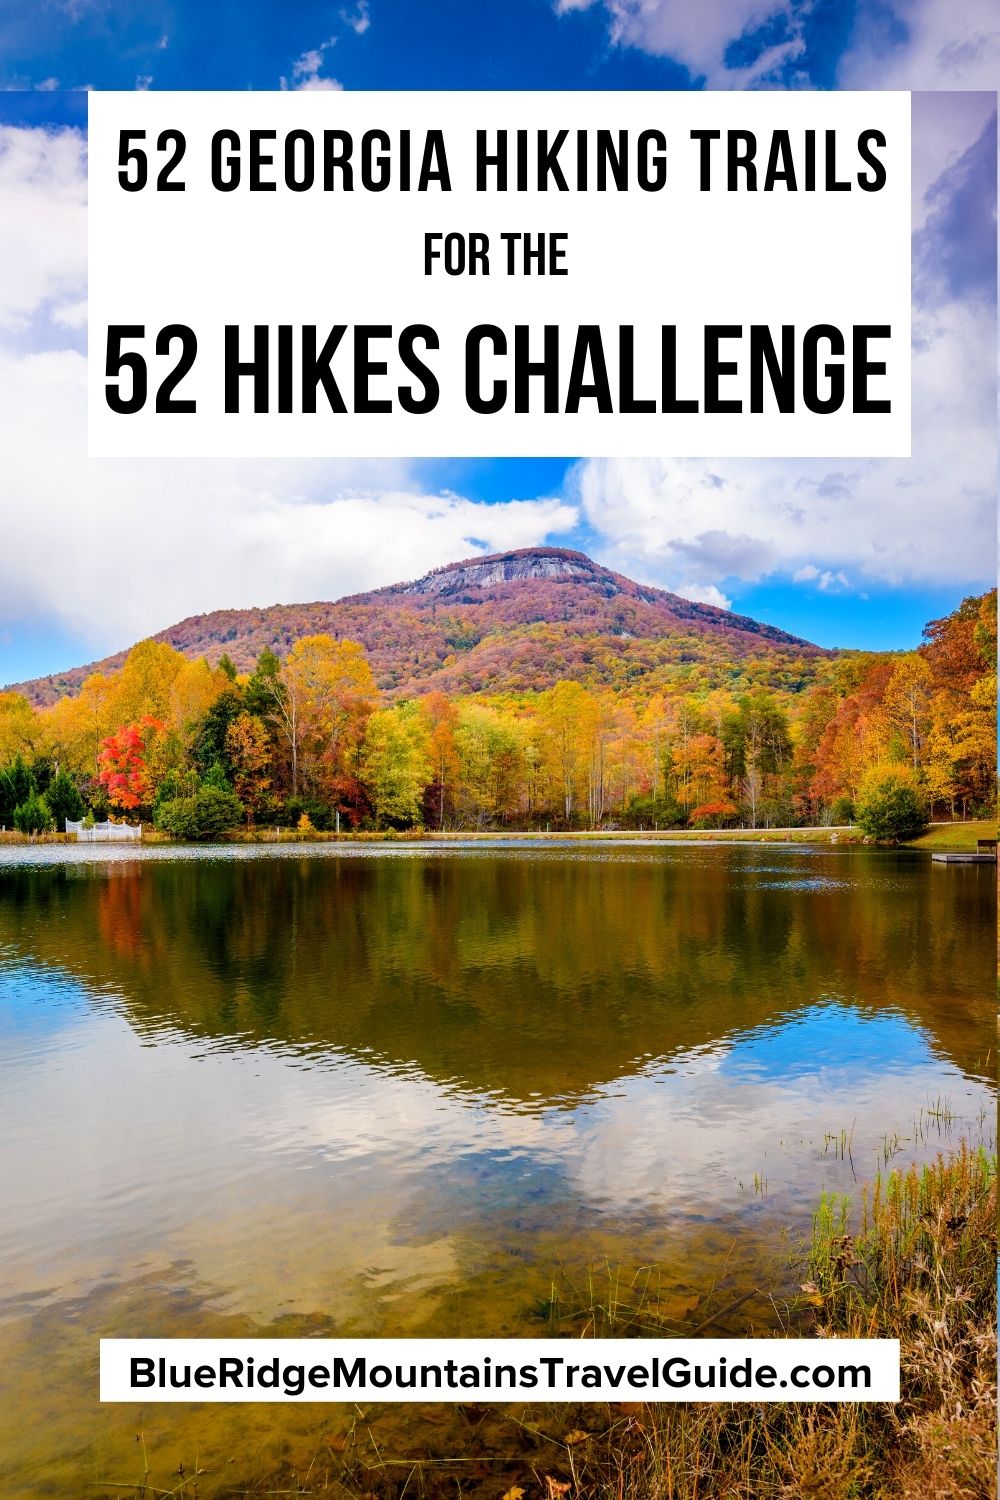 The 10 Hiking Essentials Packing List for the Blue Ridge Mountains